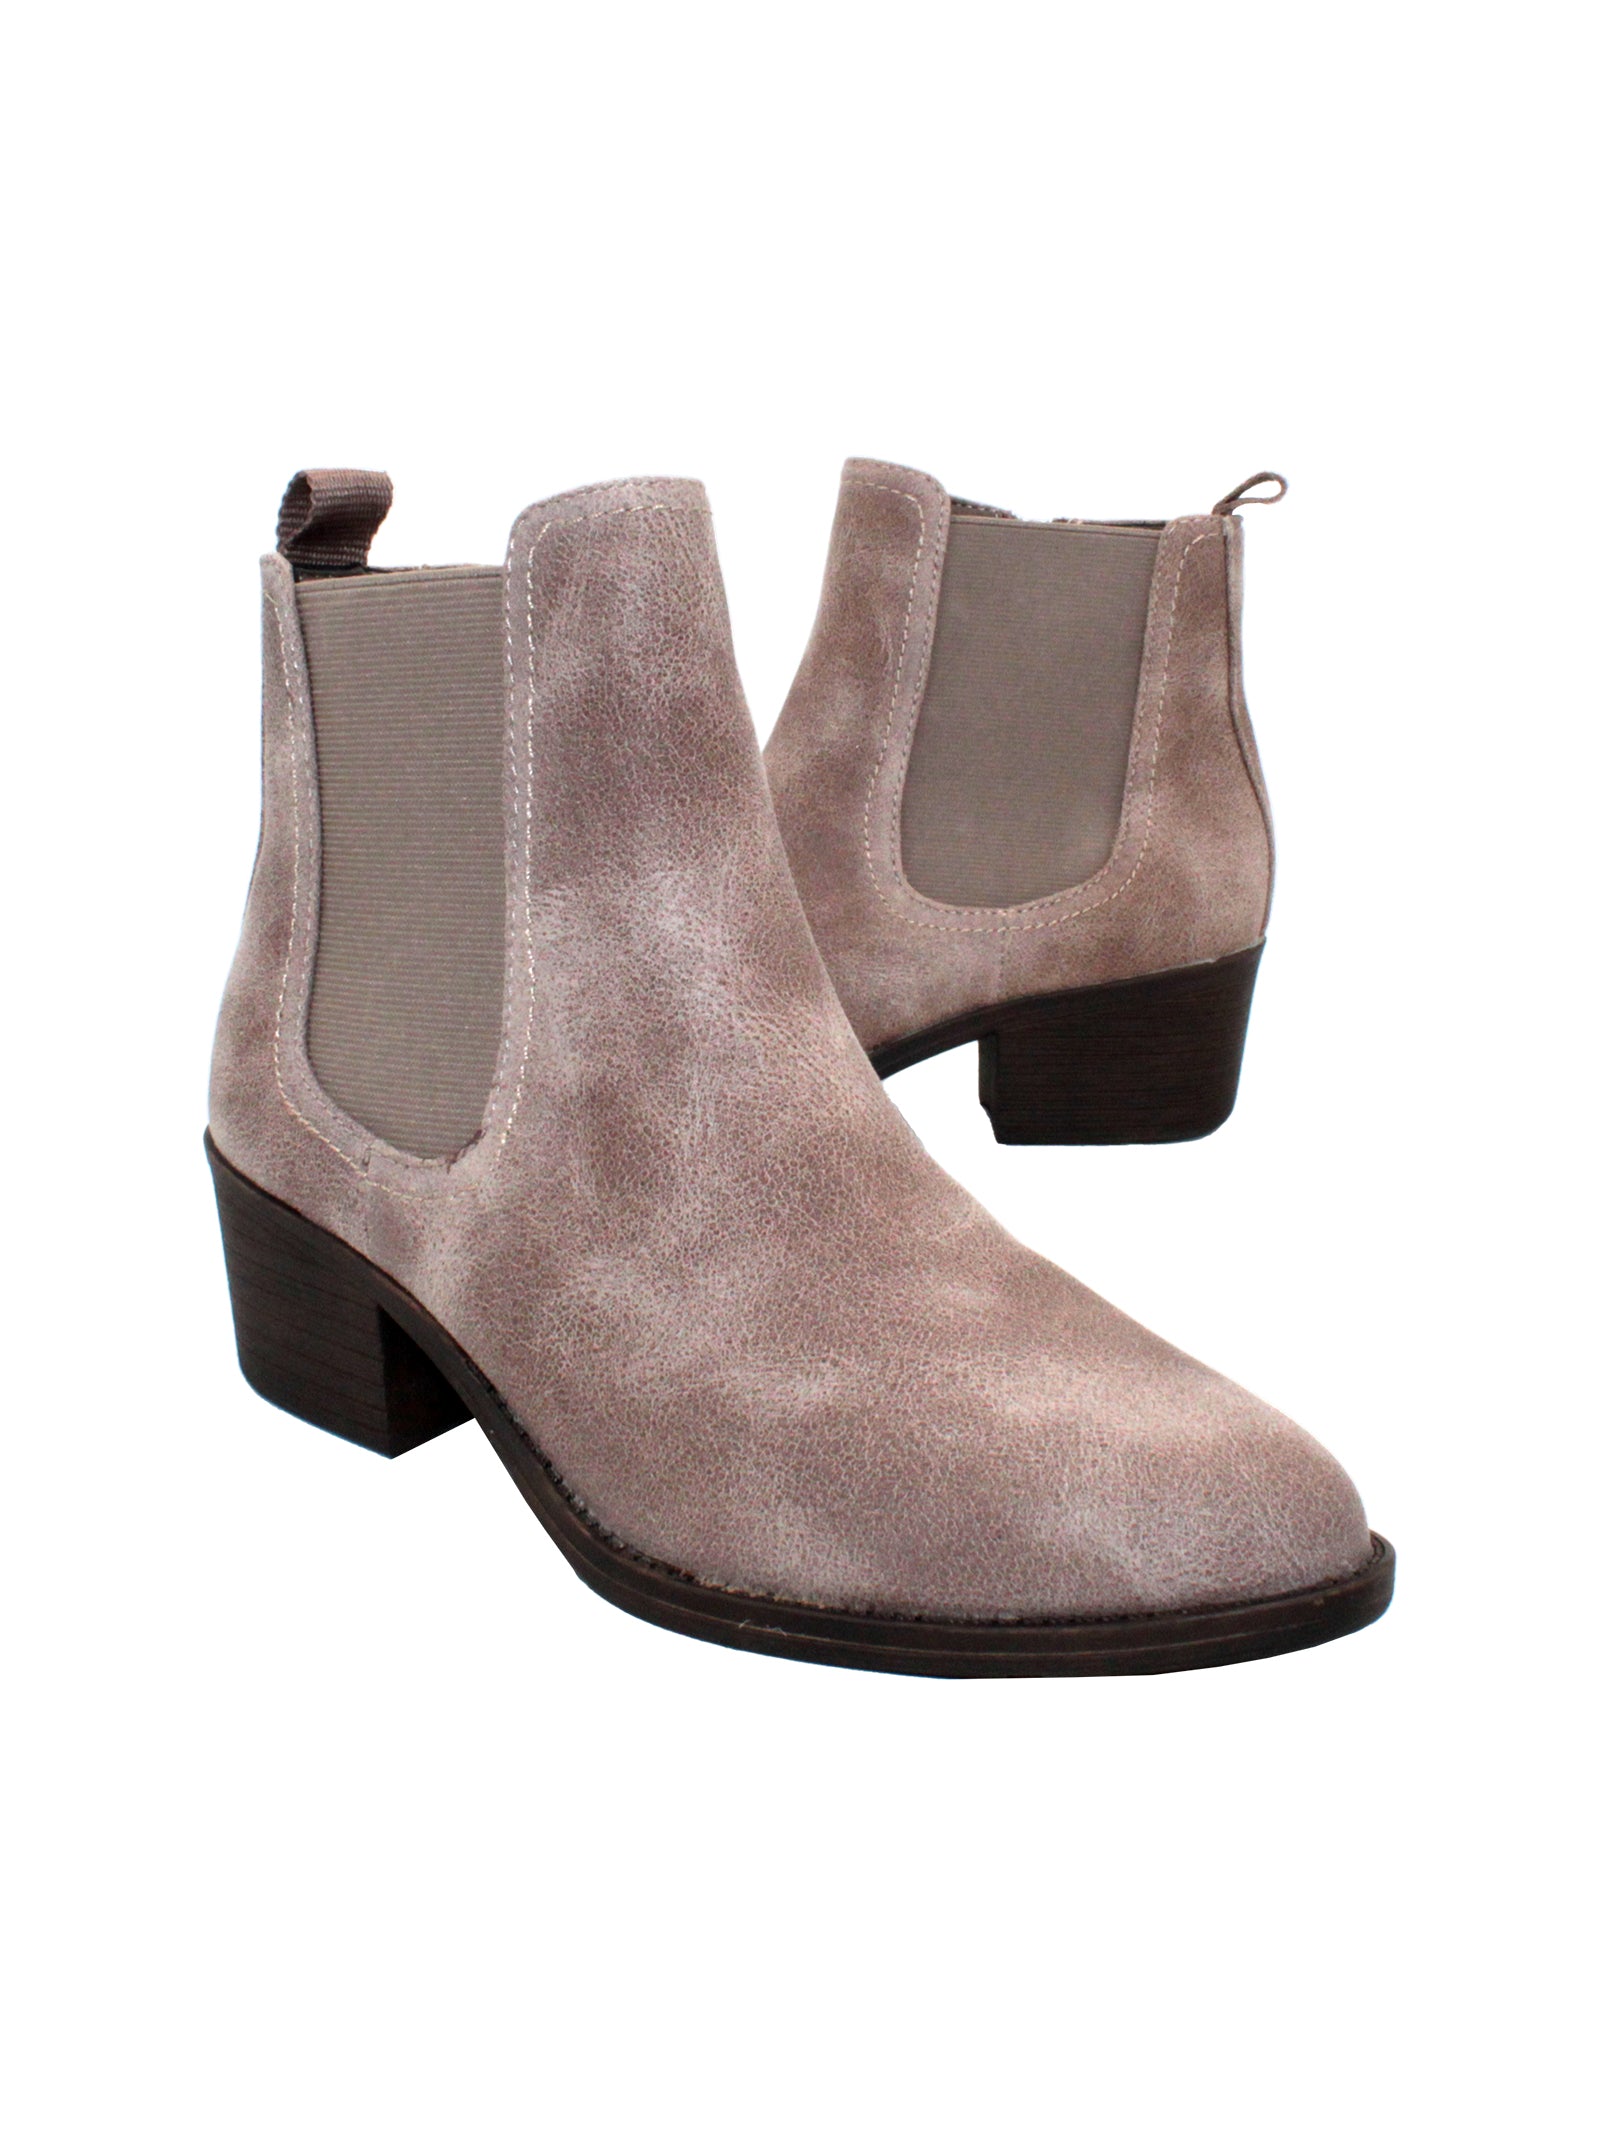 The ‘Carriage’ Chelsea bootie by Volatile, in beautiful rustic effect faux leather or matte metallic faux snake, is right on trend with a wide elastic side panel allowing for flexibility and comfort while walking. We took the level of ease a step further by adding an inside zipper, making these booties effortless to put on and off.  stone